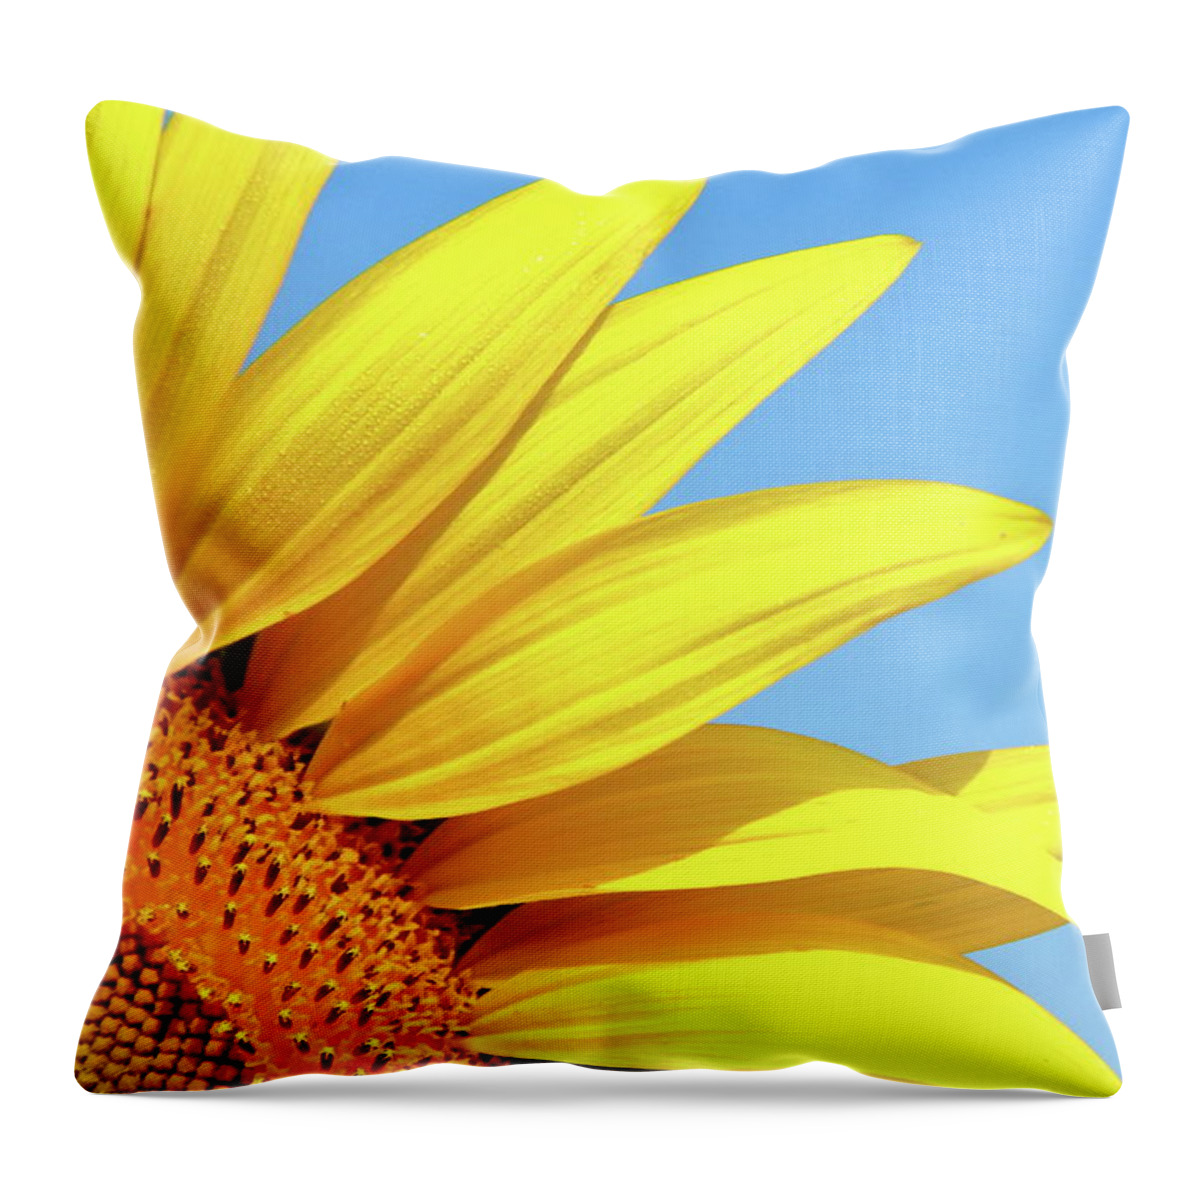 Sunflower Throw Pillow featuring the photograph Summer Shunshine by Lens Art Photography By Larry Trager